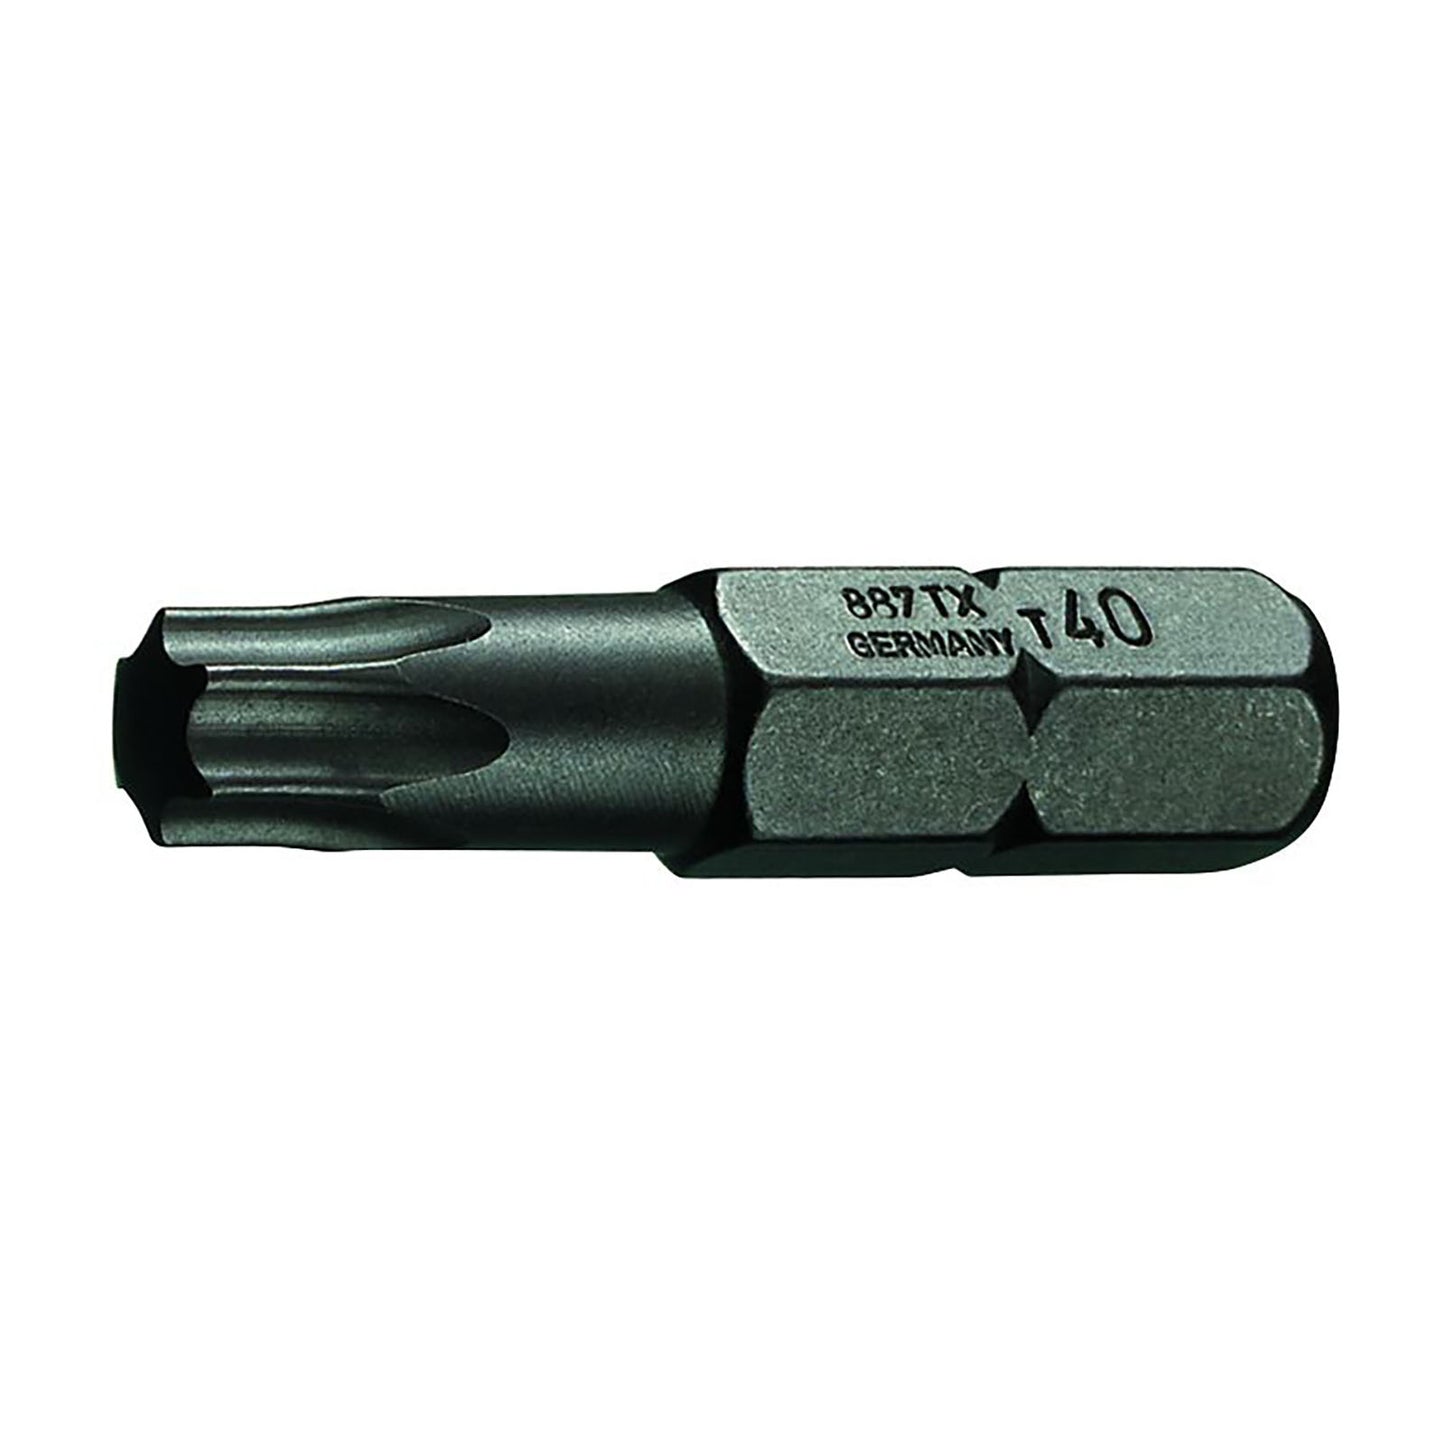 GEDORE 687 TX T7 S-010 - Embout TORX® 1/4", T7 (6541910)